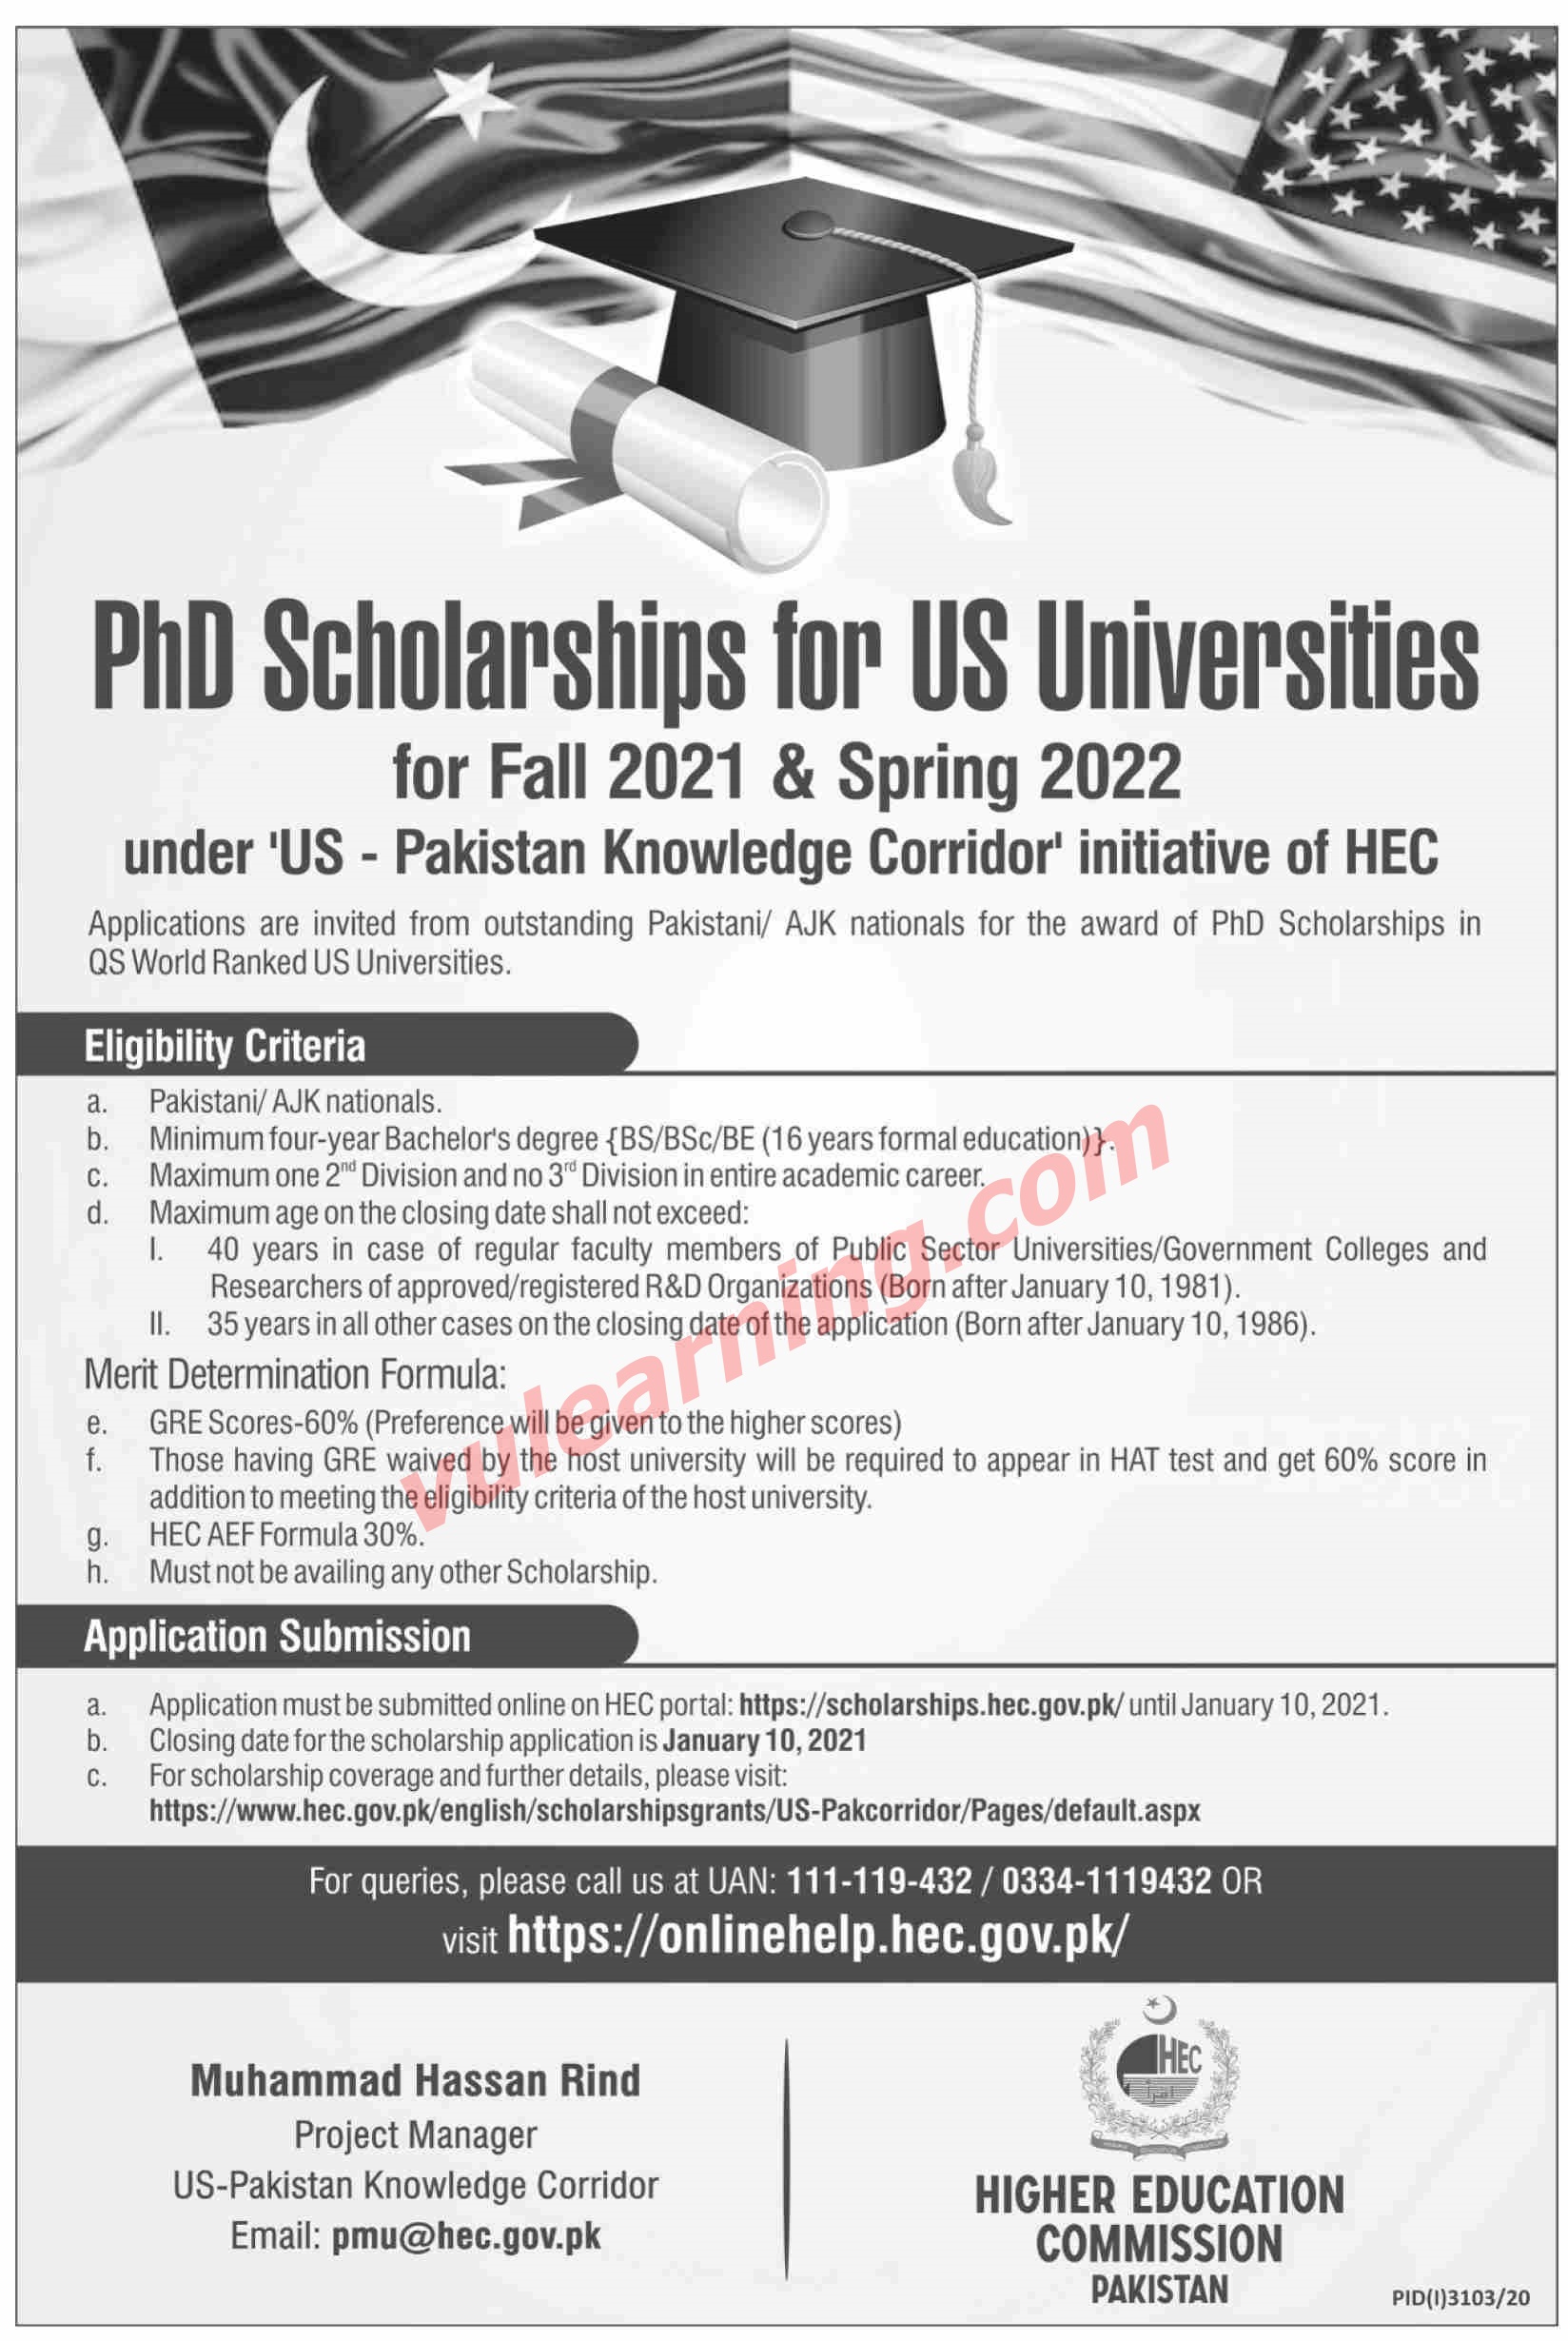 phd admission requirements in pakistan